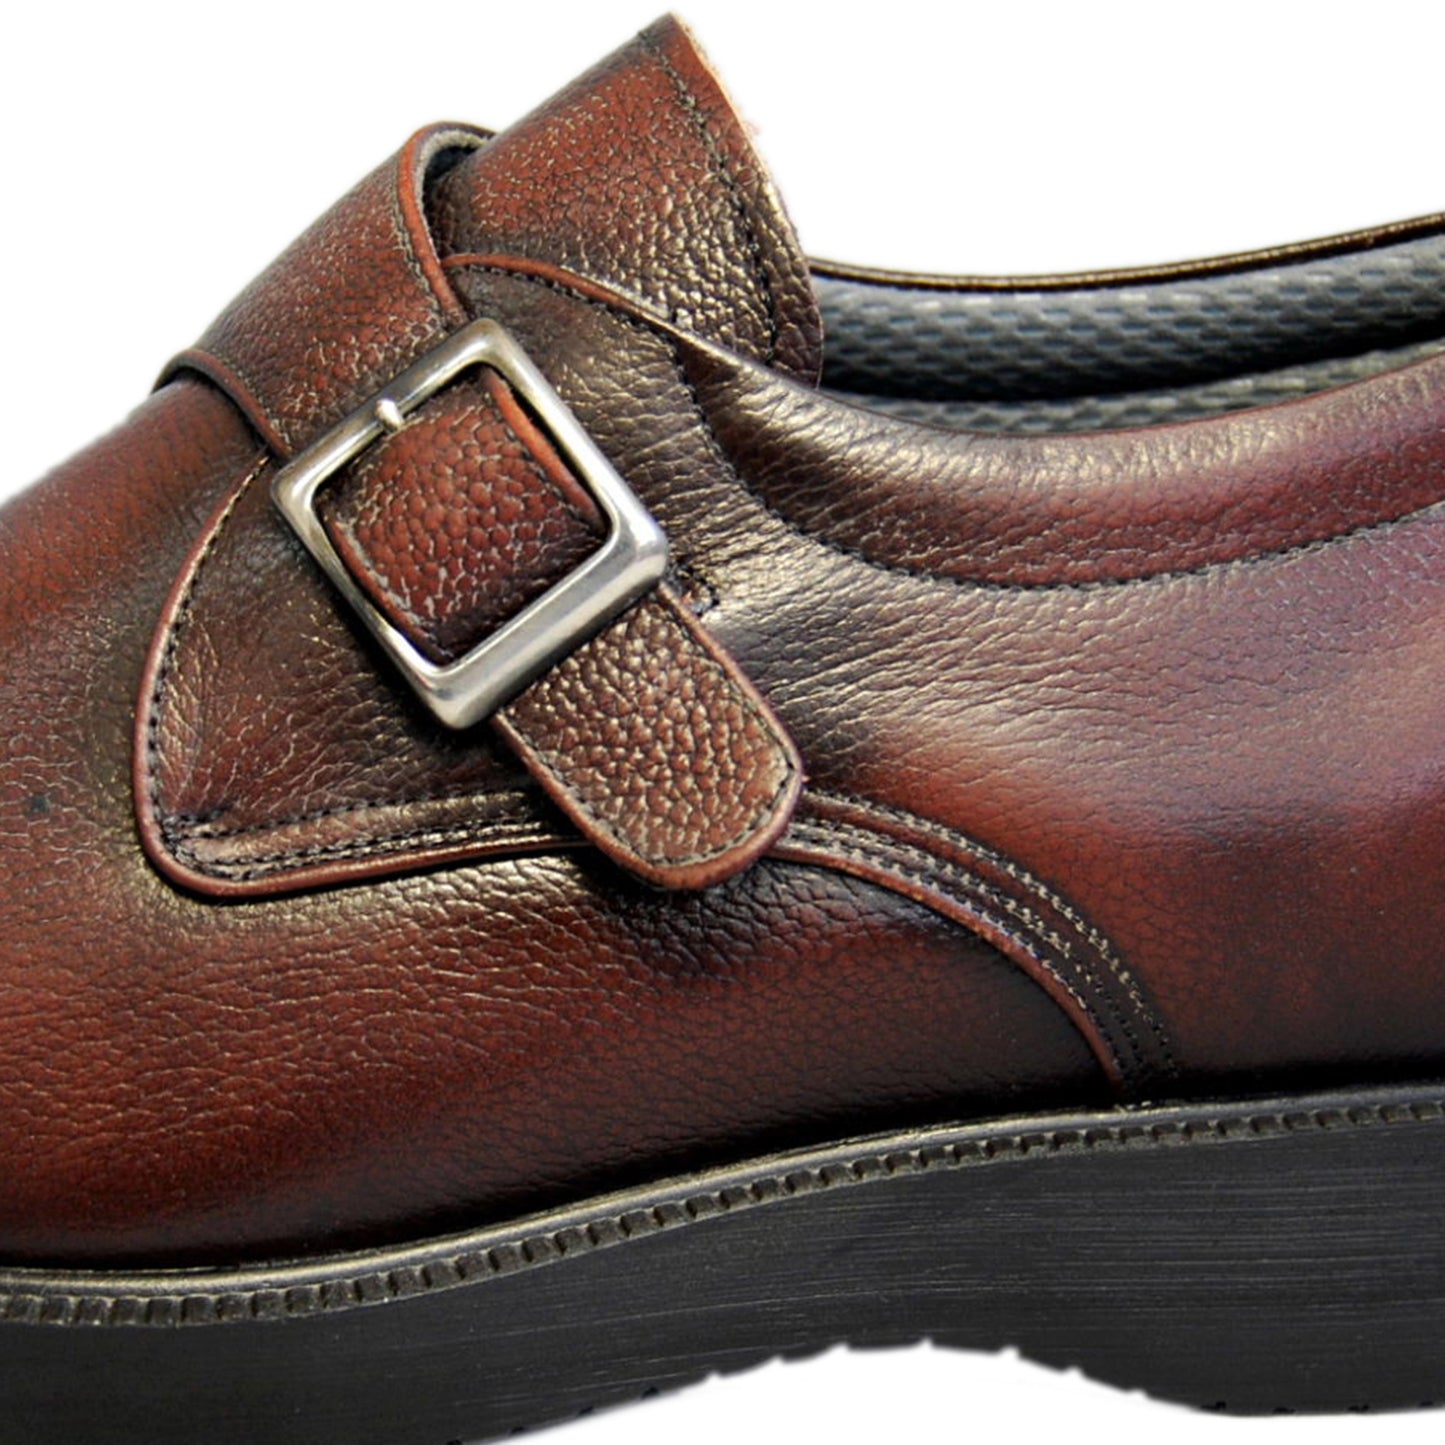 Men's Elevator Shoes Height Increasing 2.2" Taller Single Monk Strap Slip on Plain Toe Wide Genuine Leather No. 921